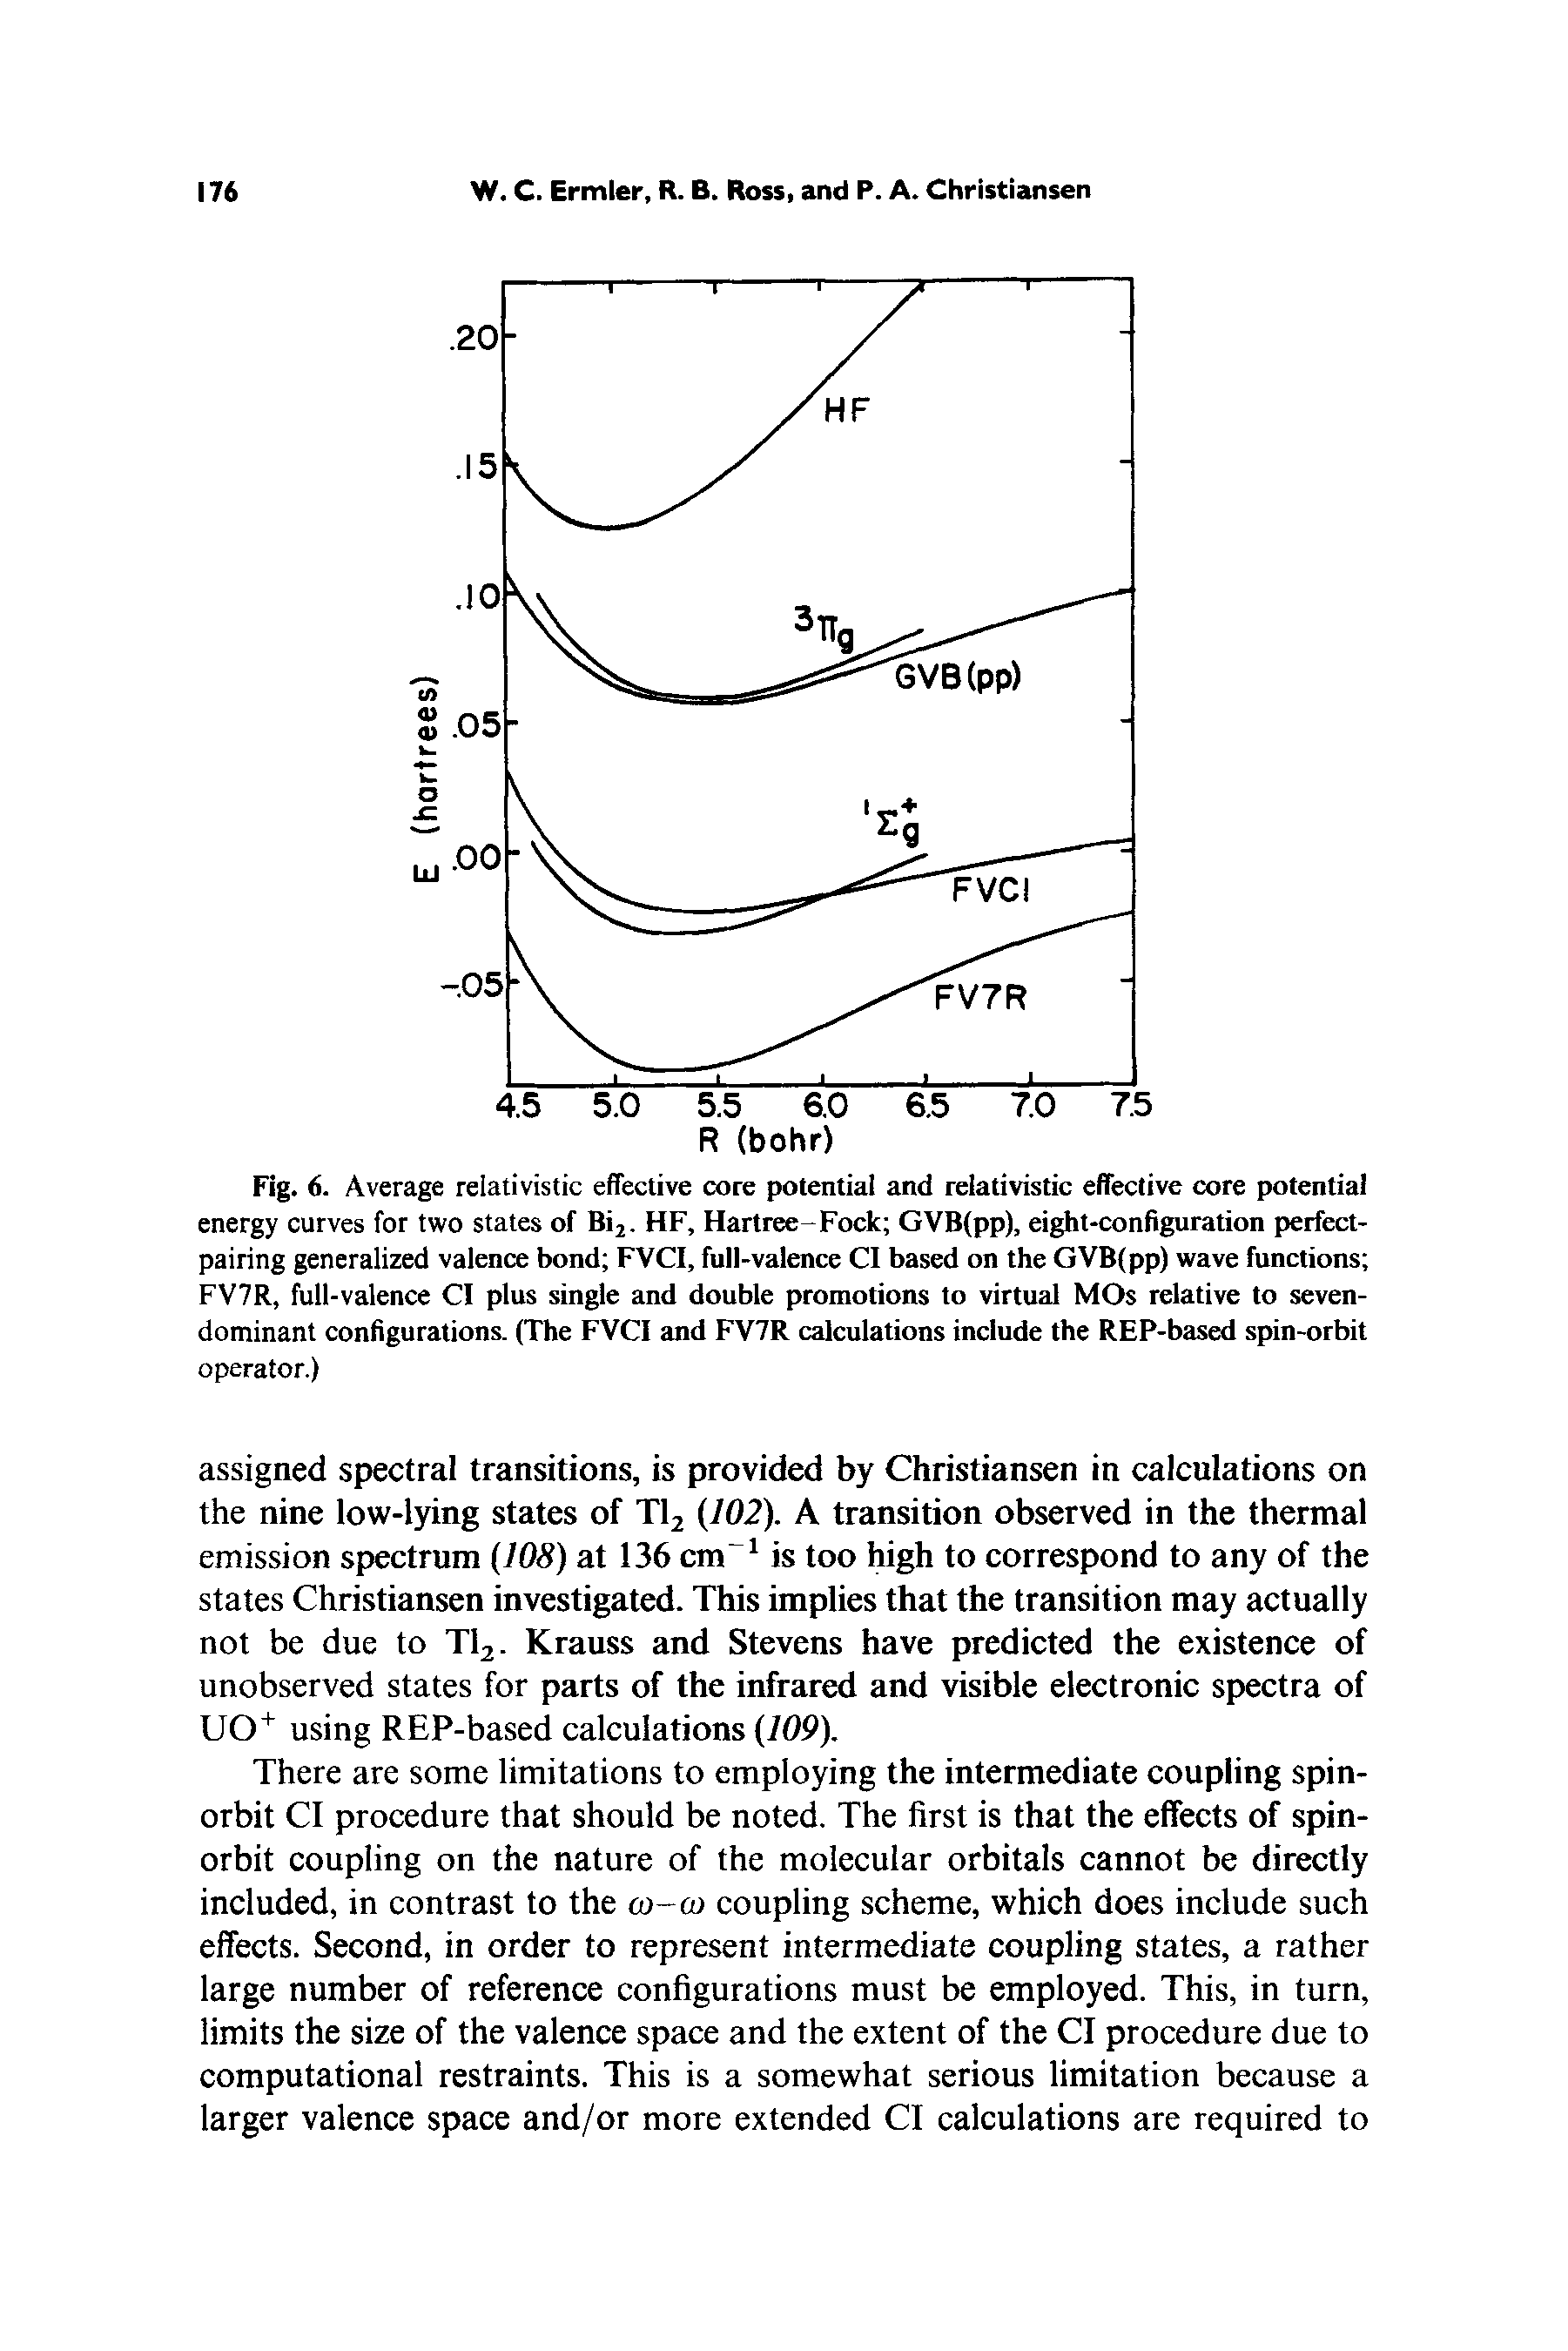 Fig. 6. Average relativistic effective core potential and relativistic effective core potential energy curves for two states of Bi2. HF, Hartree-Fock GVB(pp), eight-configuration perfect-pairing generalized valence bond FVCI, full-valence Cl based on the GVB(pp) wave functions FV7R, full-valence Cl plus single and double promotions to virtual MOs relative to seven-dominant configurations. (The FVCI and FV7R calculations include the REP-based spin-orbit operator.)...